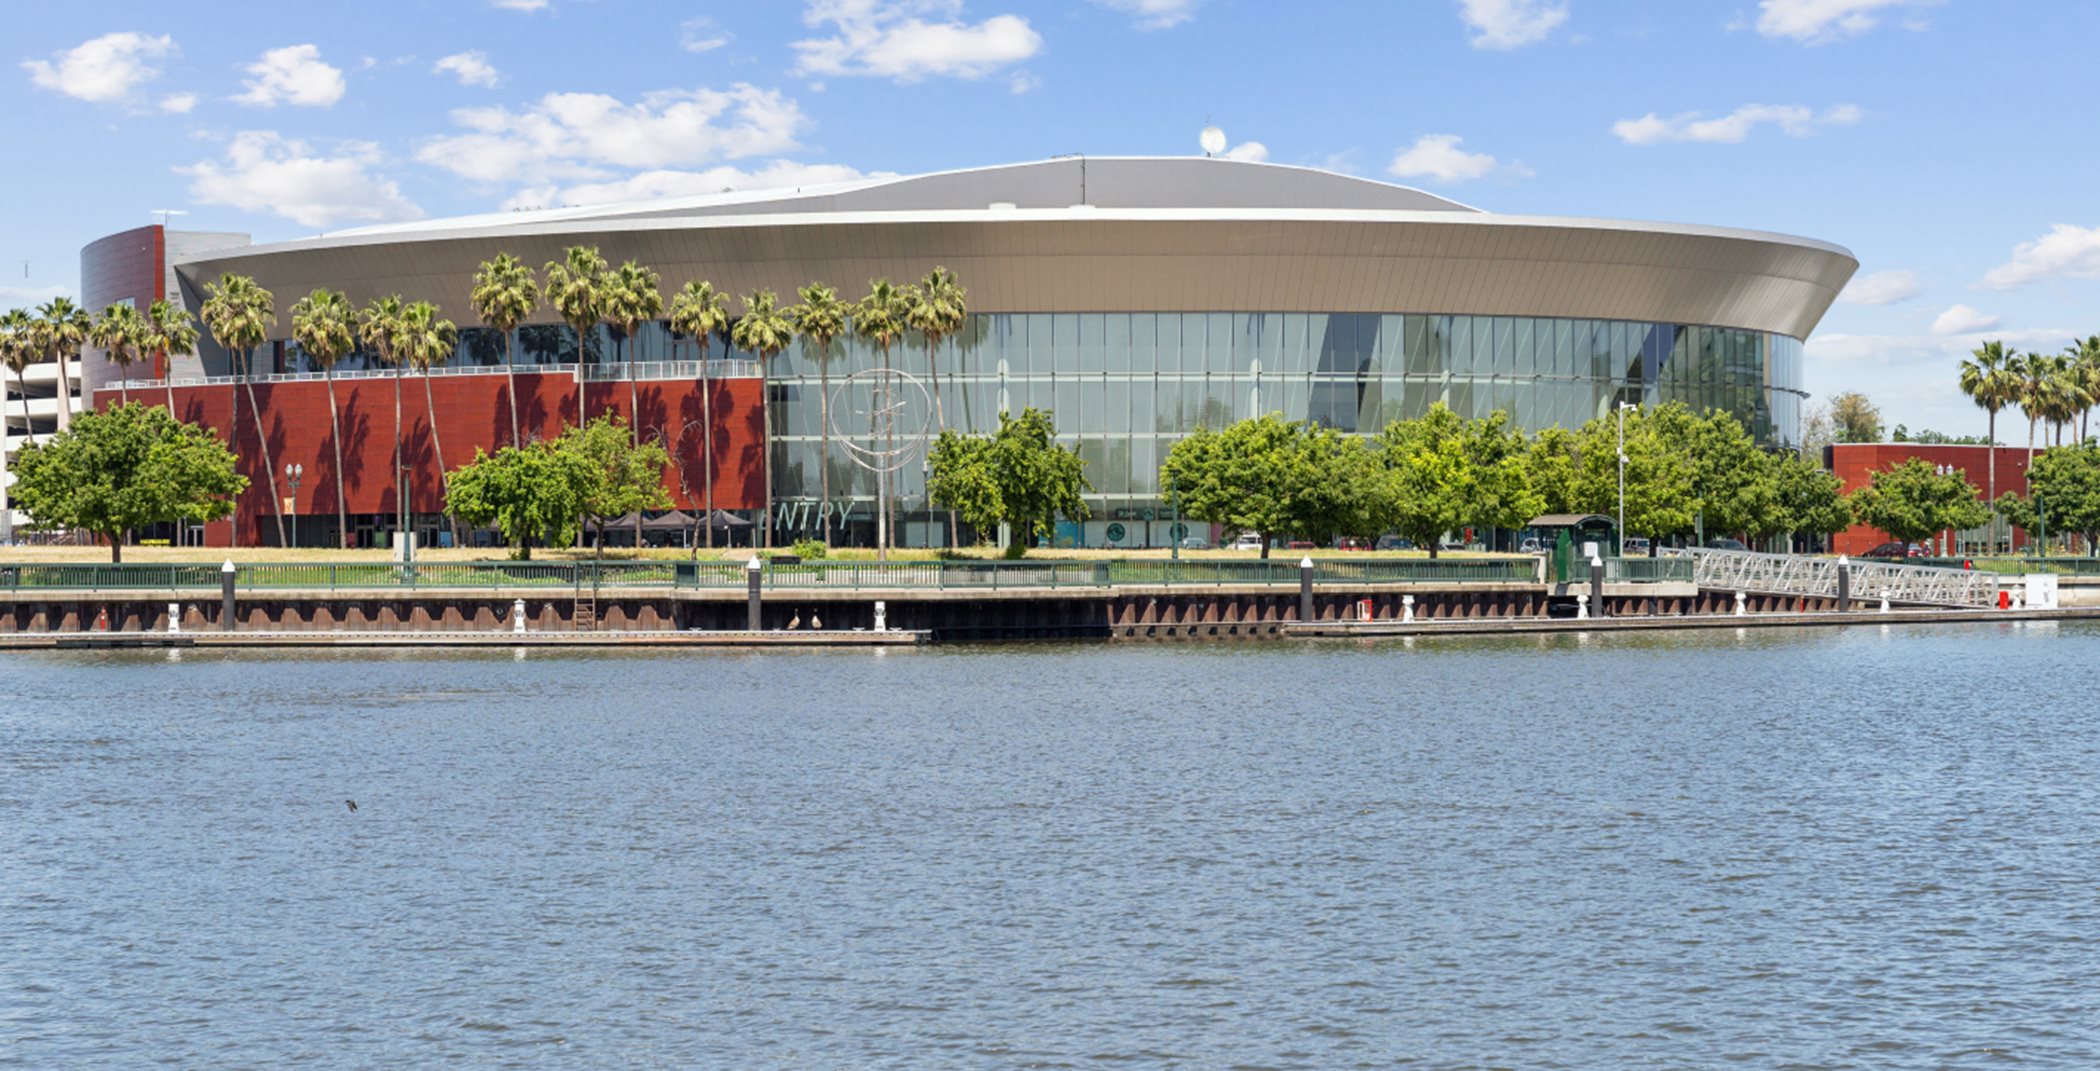 Stockton Arena from across the water